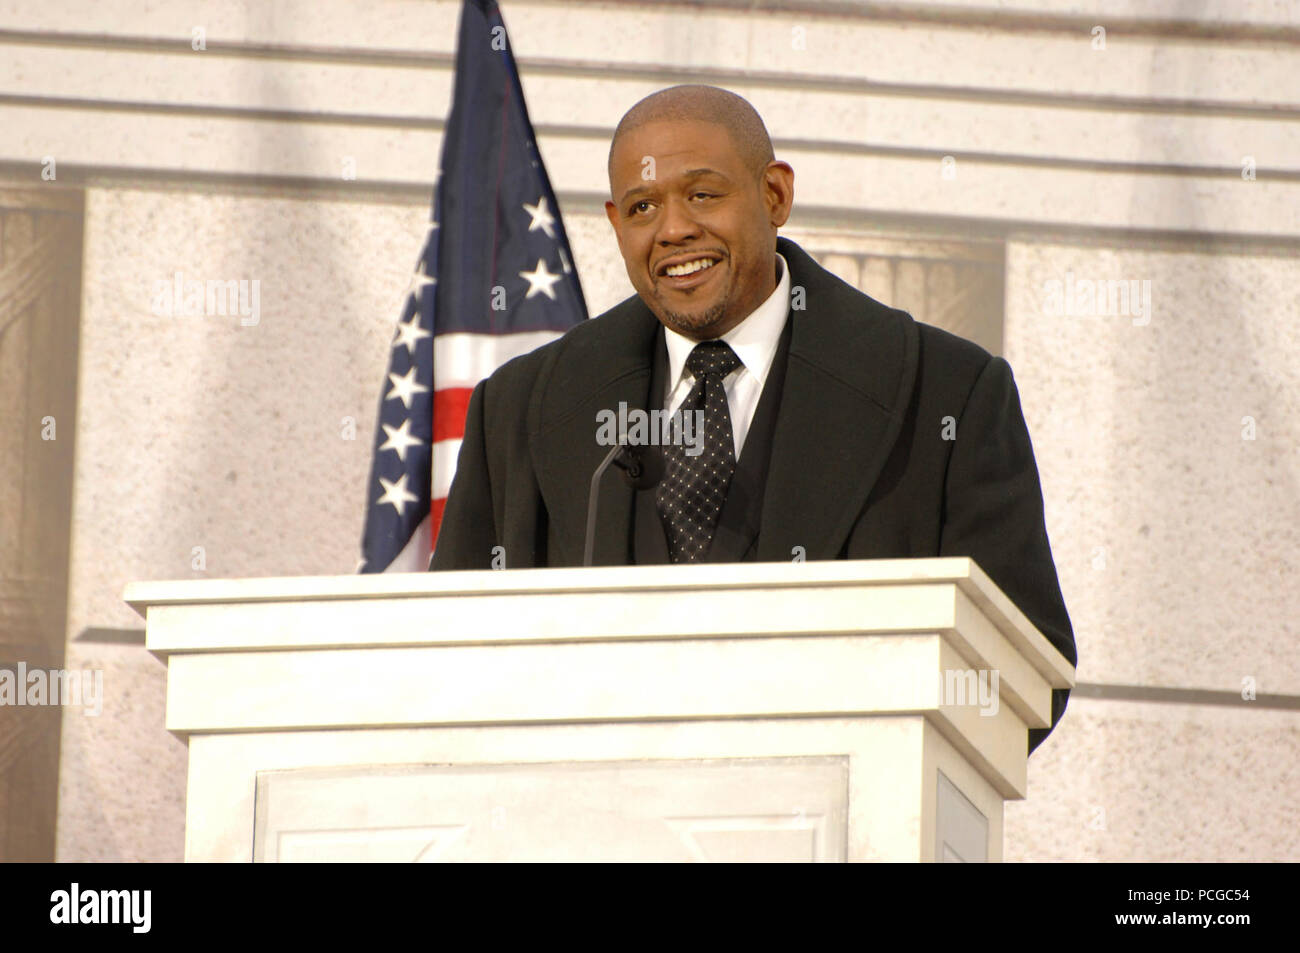 During the inaugural opening ceremonies at the Lincoln Memorial on the National Mall in Washington, D.C., Jan. 18, 2009, Forest Whitaker speaks to the crowd about the importance of poets, writers and other artists in our society. More than 5,000 men and women in uniform are providing military ceremonial support to the presidential inauguration, a tradition dating back to George Washington's 1789 inauguration. ( Stock Photo